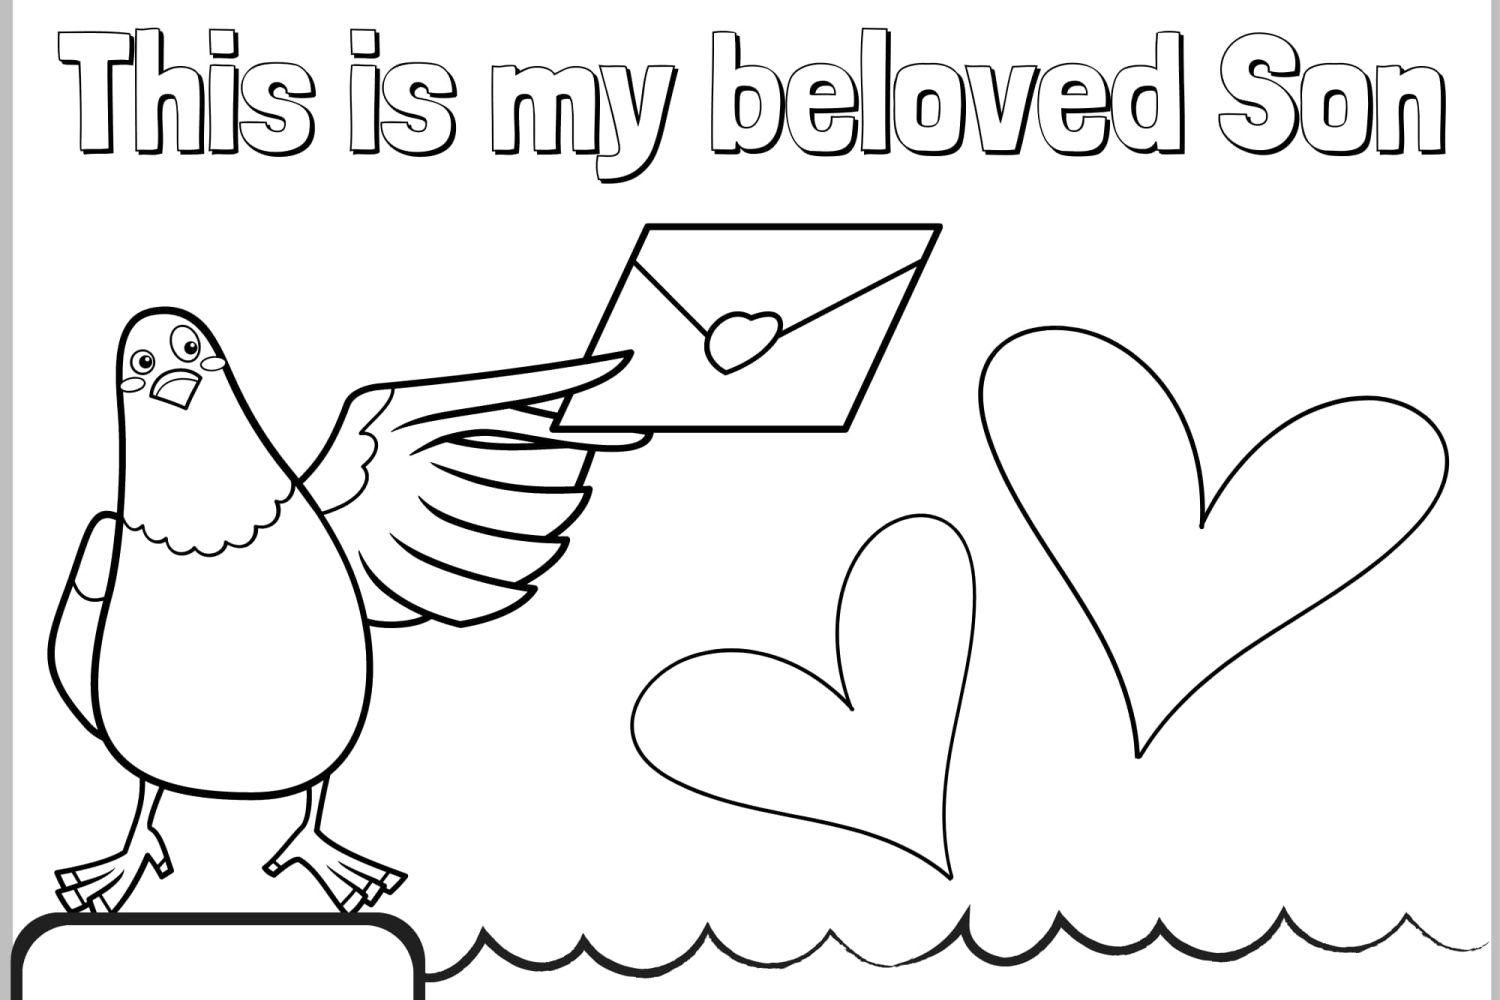 Colouring%20page%20-%20My%20beloved%20son-ce43538c Love / heart